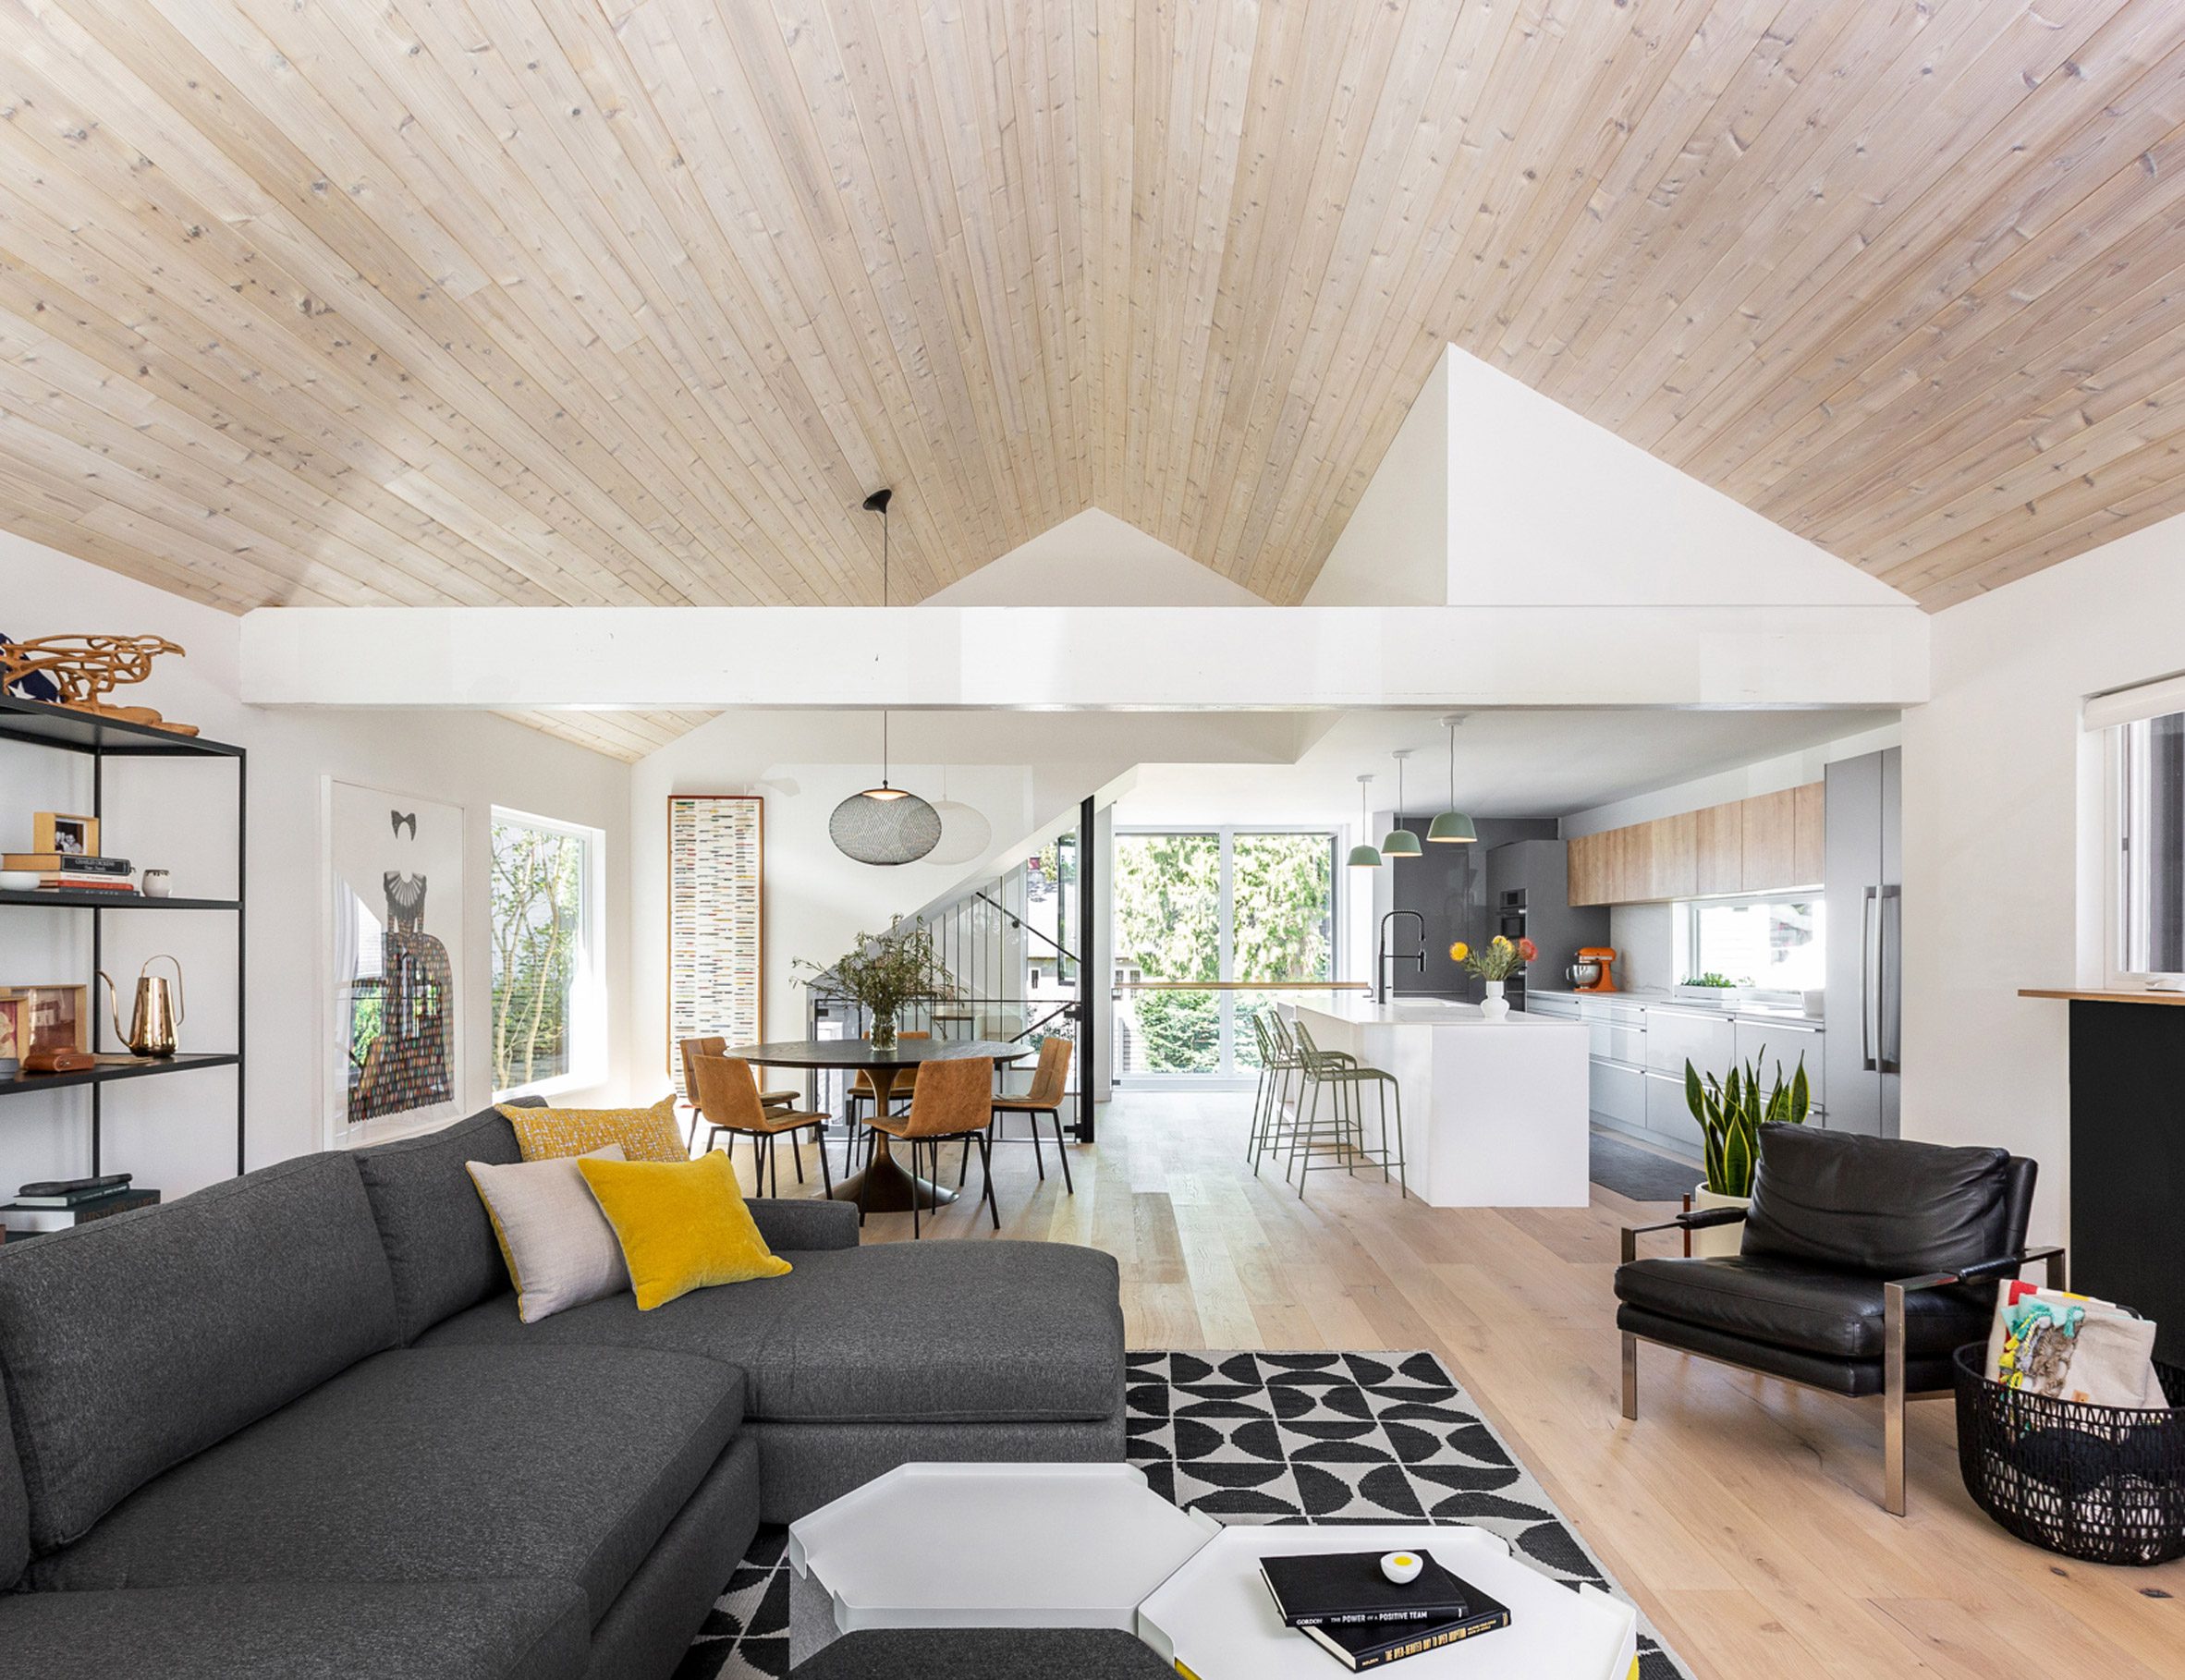 Boathouse Bungalow has stained cedar ceilings